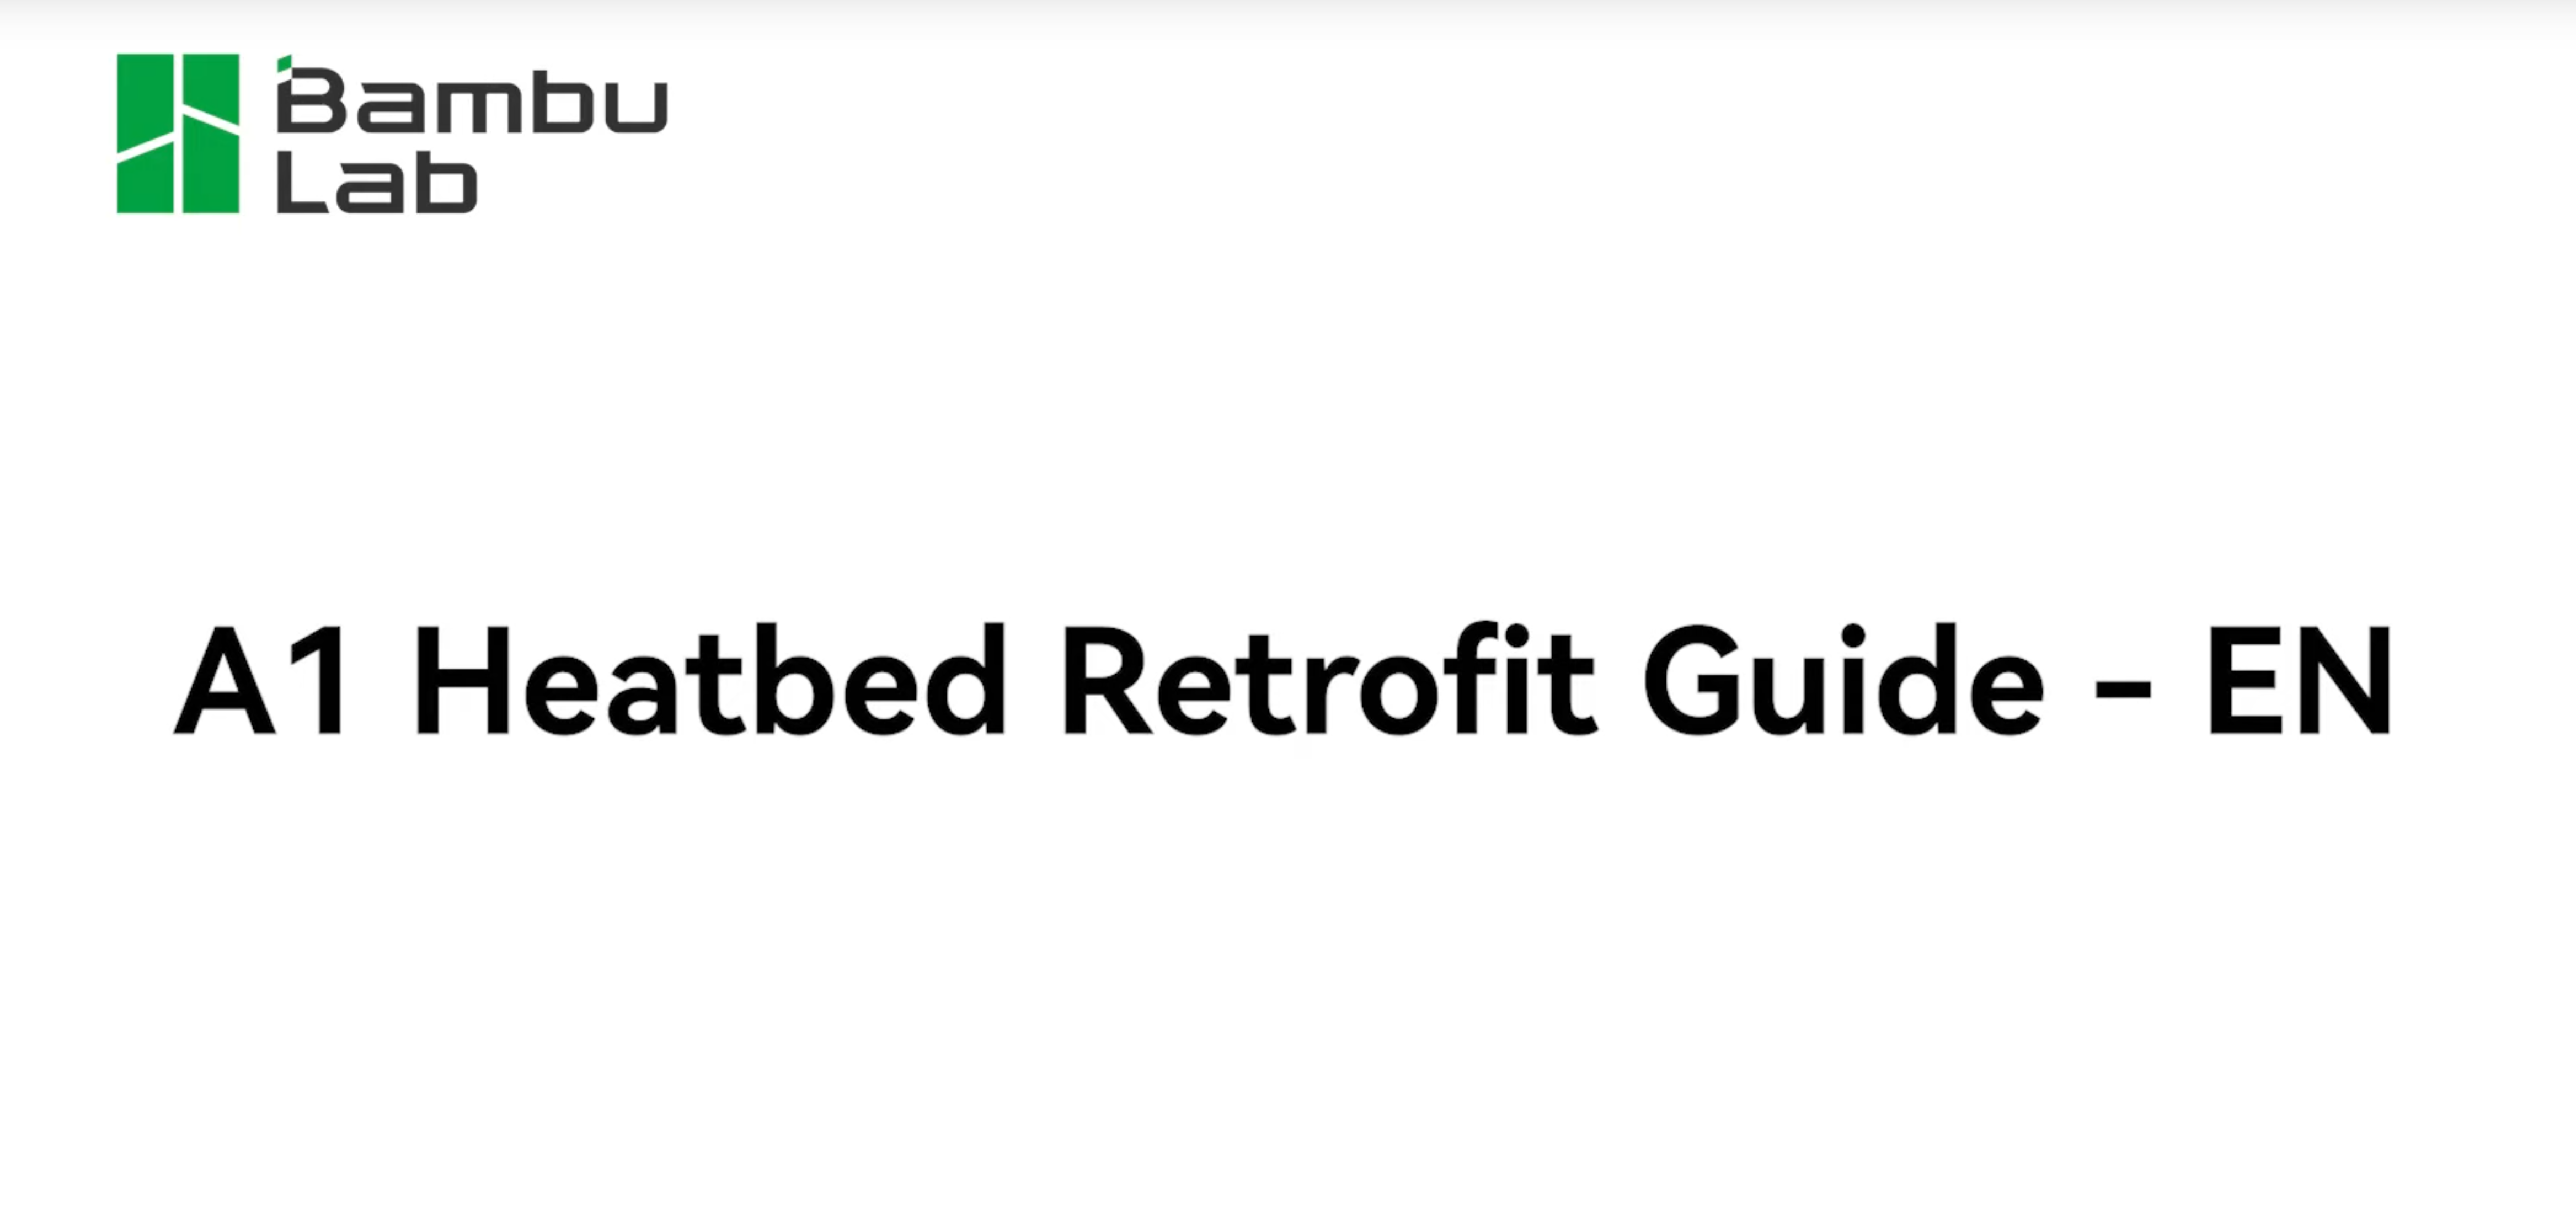 The Bambu Lab logo and the following text "A1 Heatbed Retrofit Guide - EN"